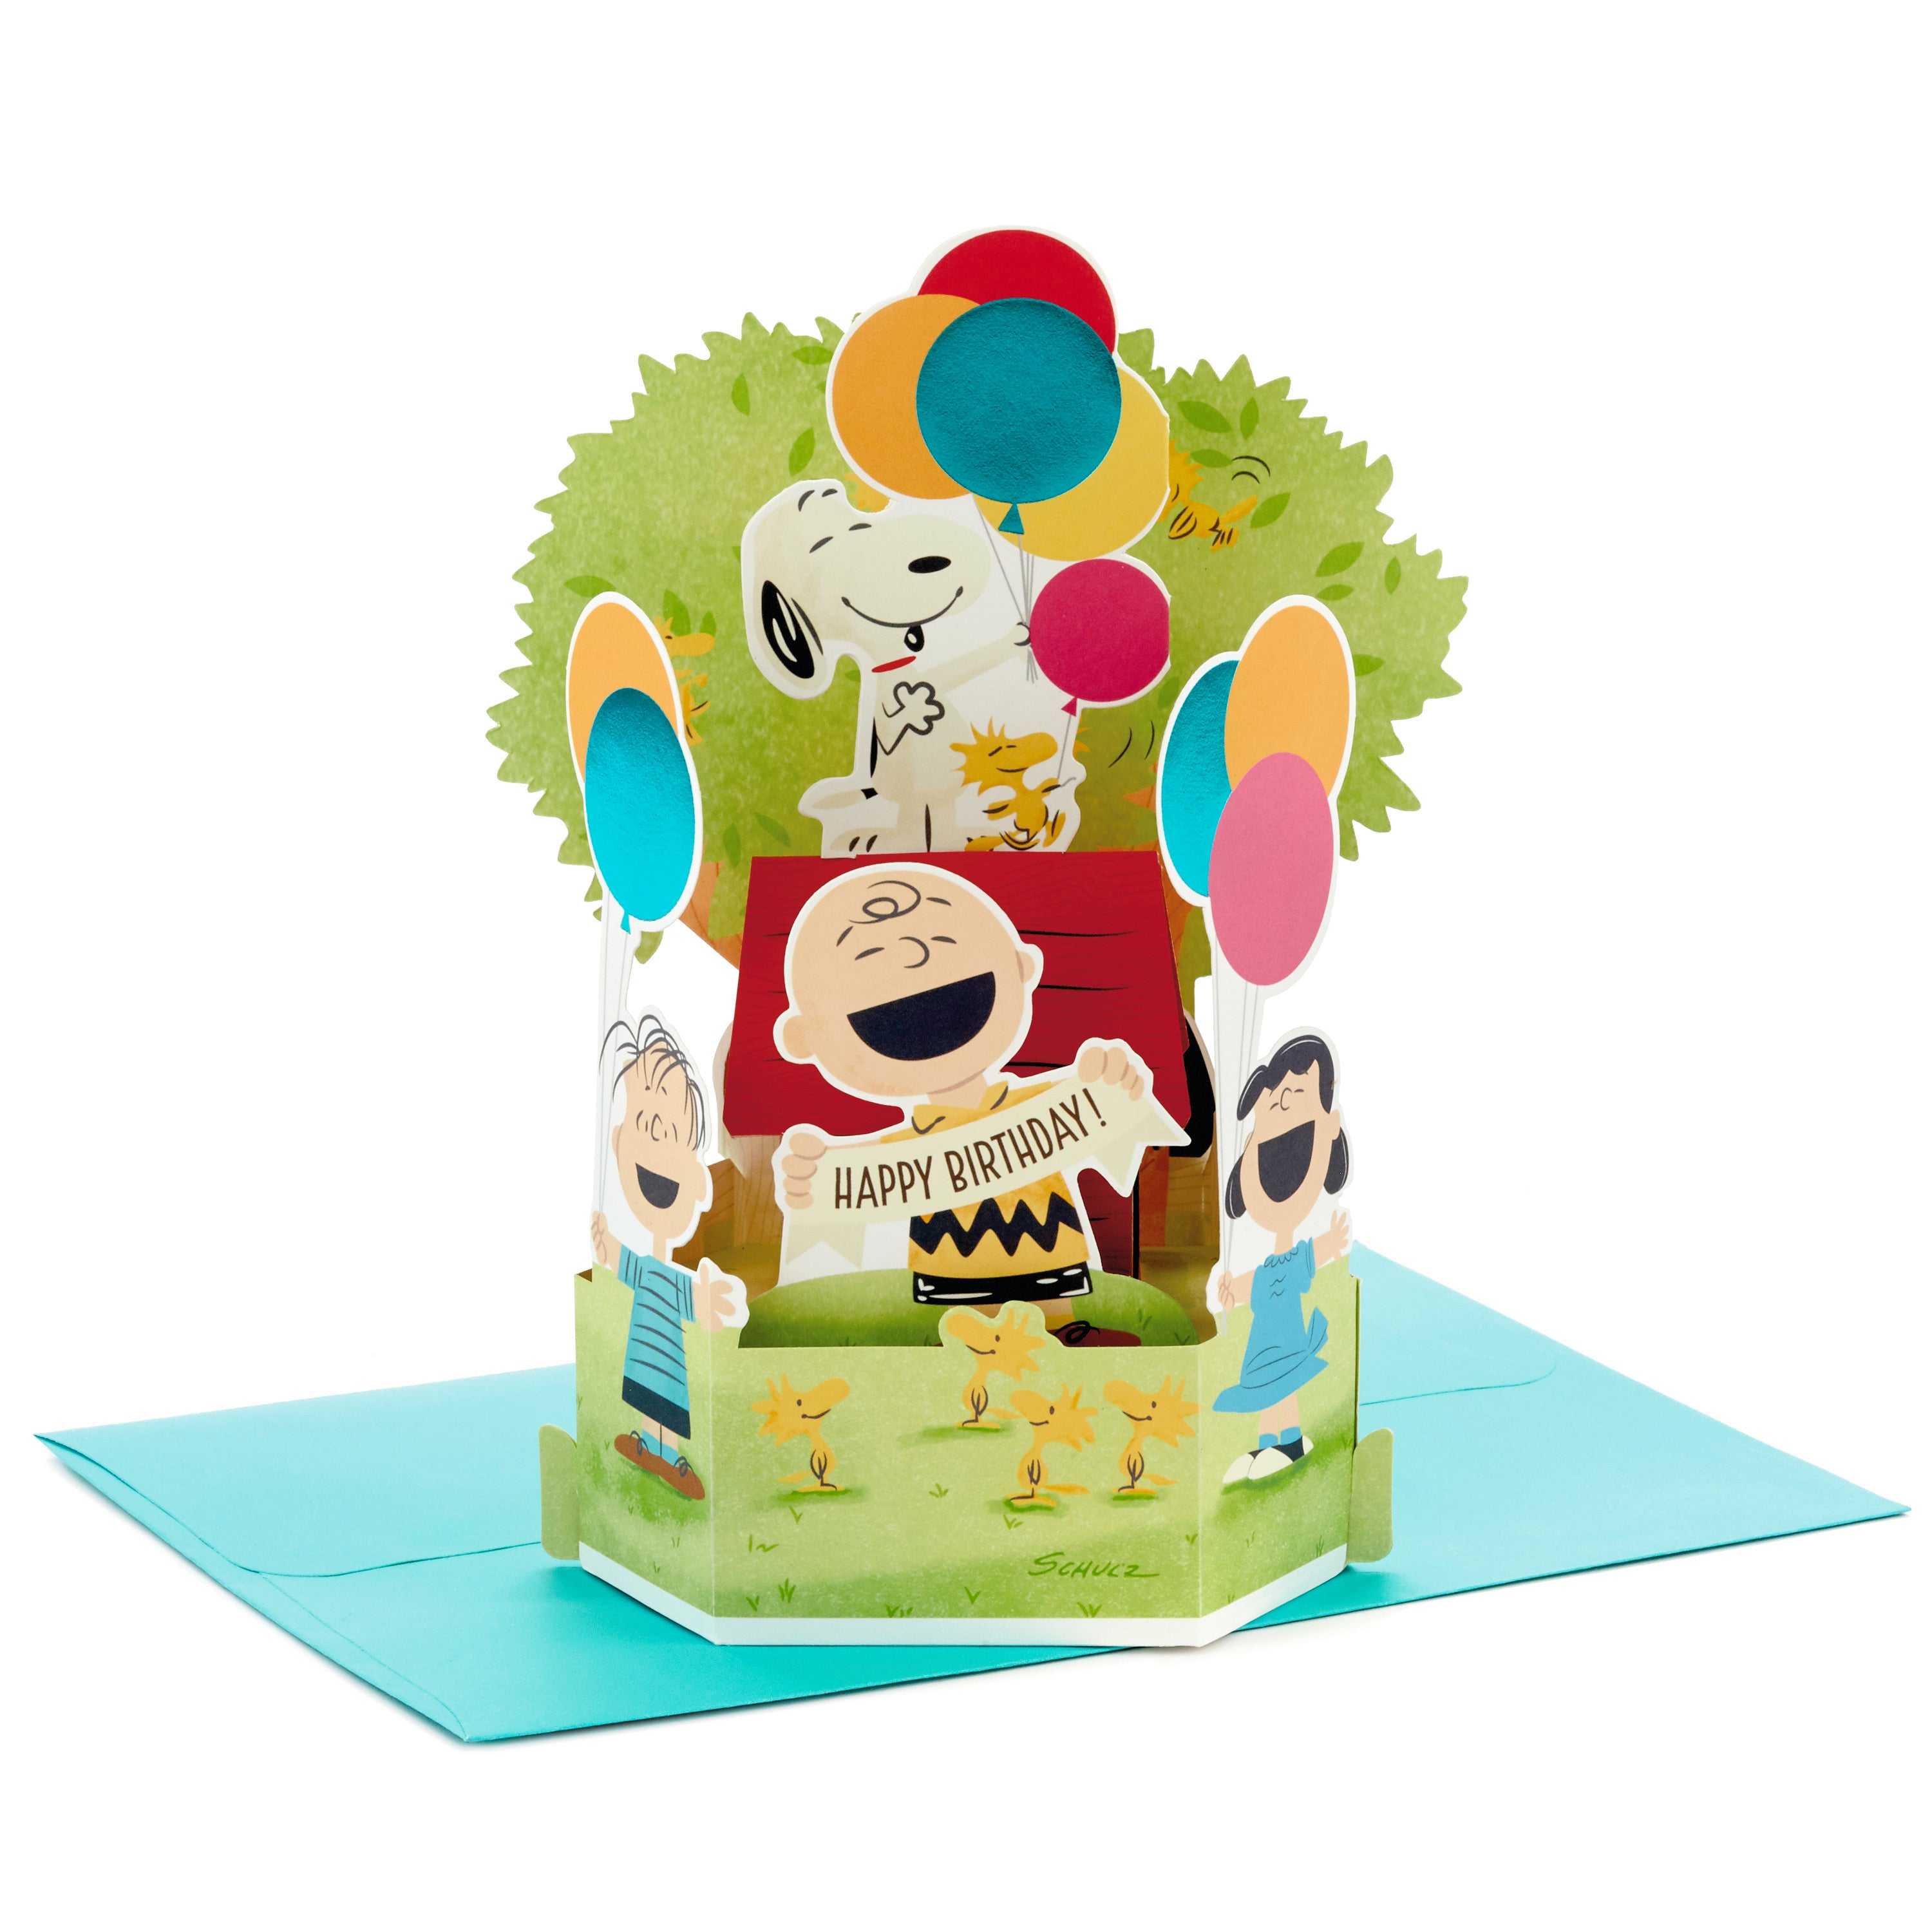  Paper Wonder Peanuts Pop Up Birthday Card (Snoopy, Charlie Brown, Day Filled with Fun)